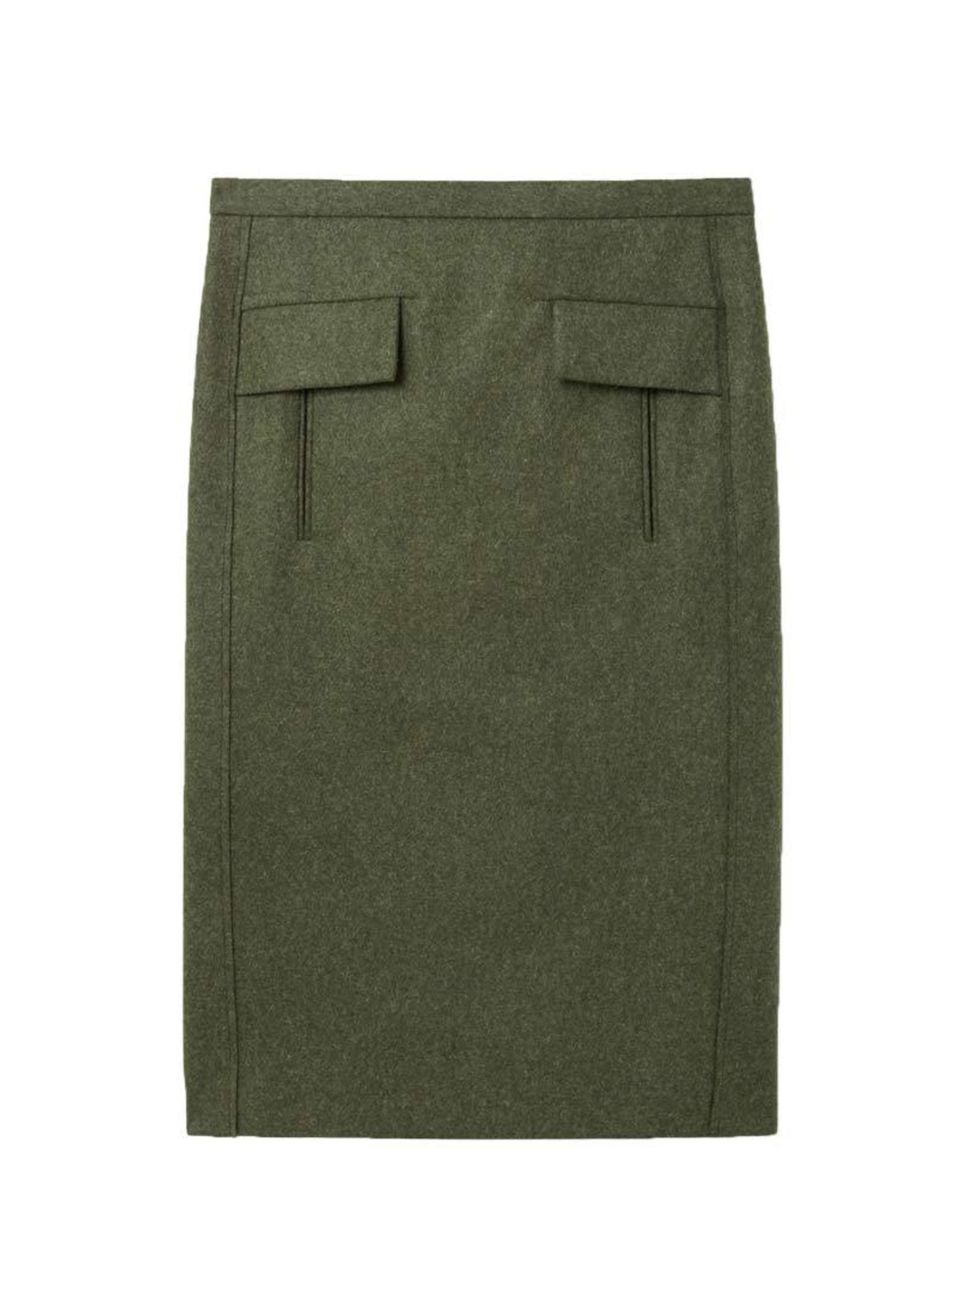 <p>Military green is a key colour this autumn - pair with denim or rich plum.</p>

<p> </p>

<p><a href="http://www.cosstores.com/gb/Shop/Women/Skirts/Flap_pocket_wool_skirt/7086-20456949.1#c-22755" target="_blank">Cos</a> skirt, £79</p>